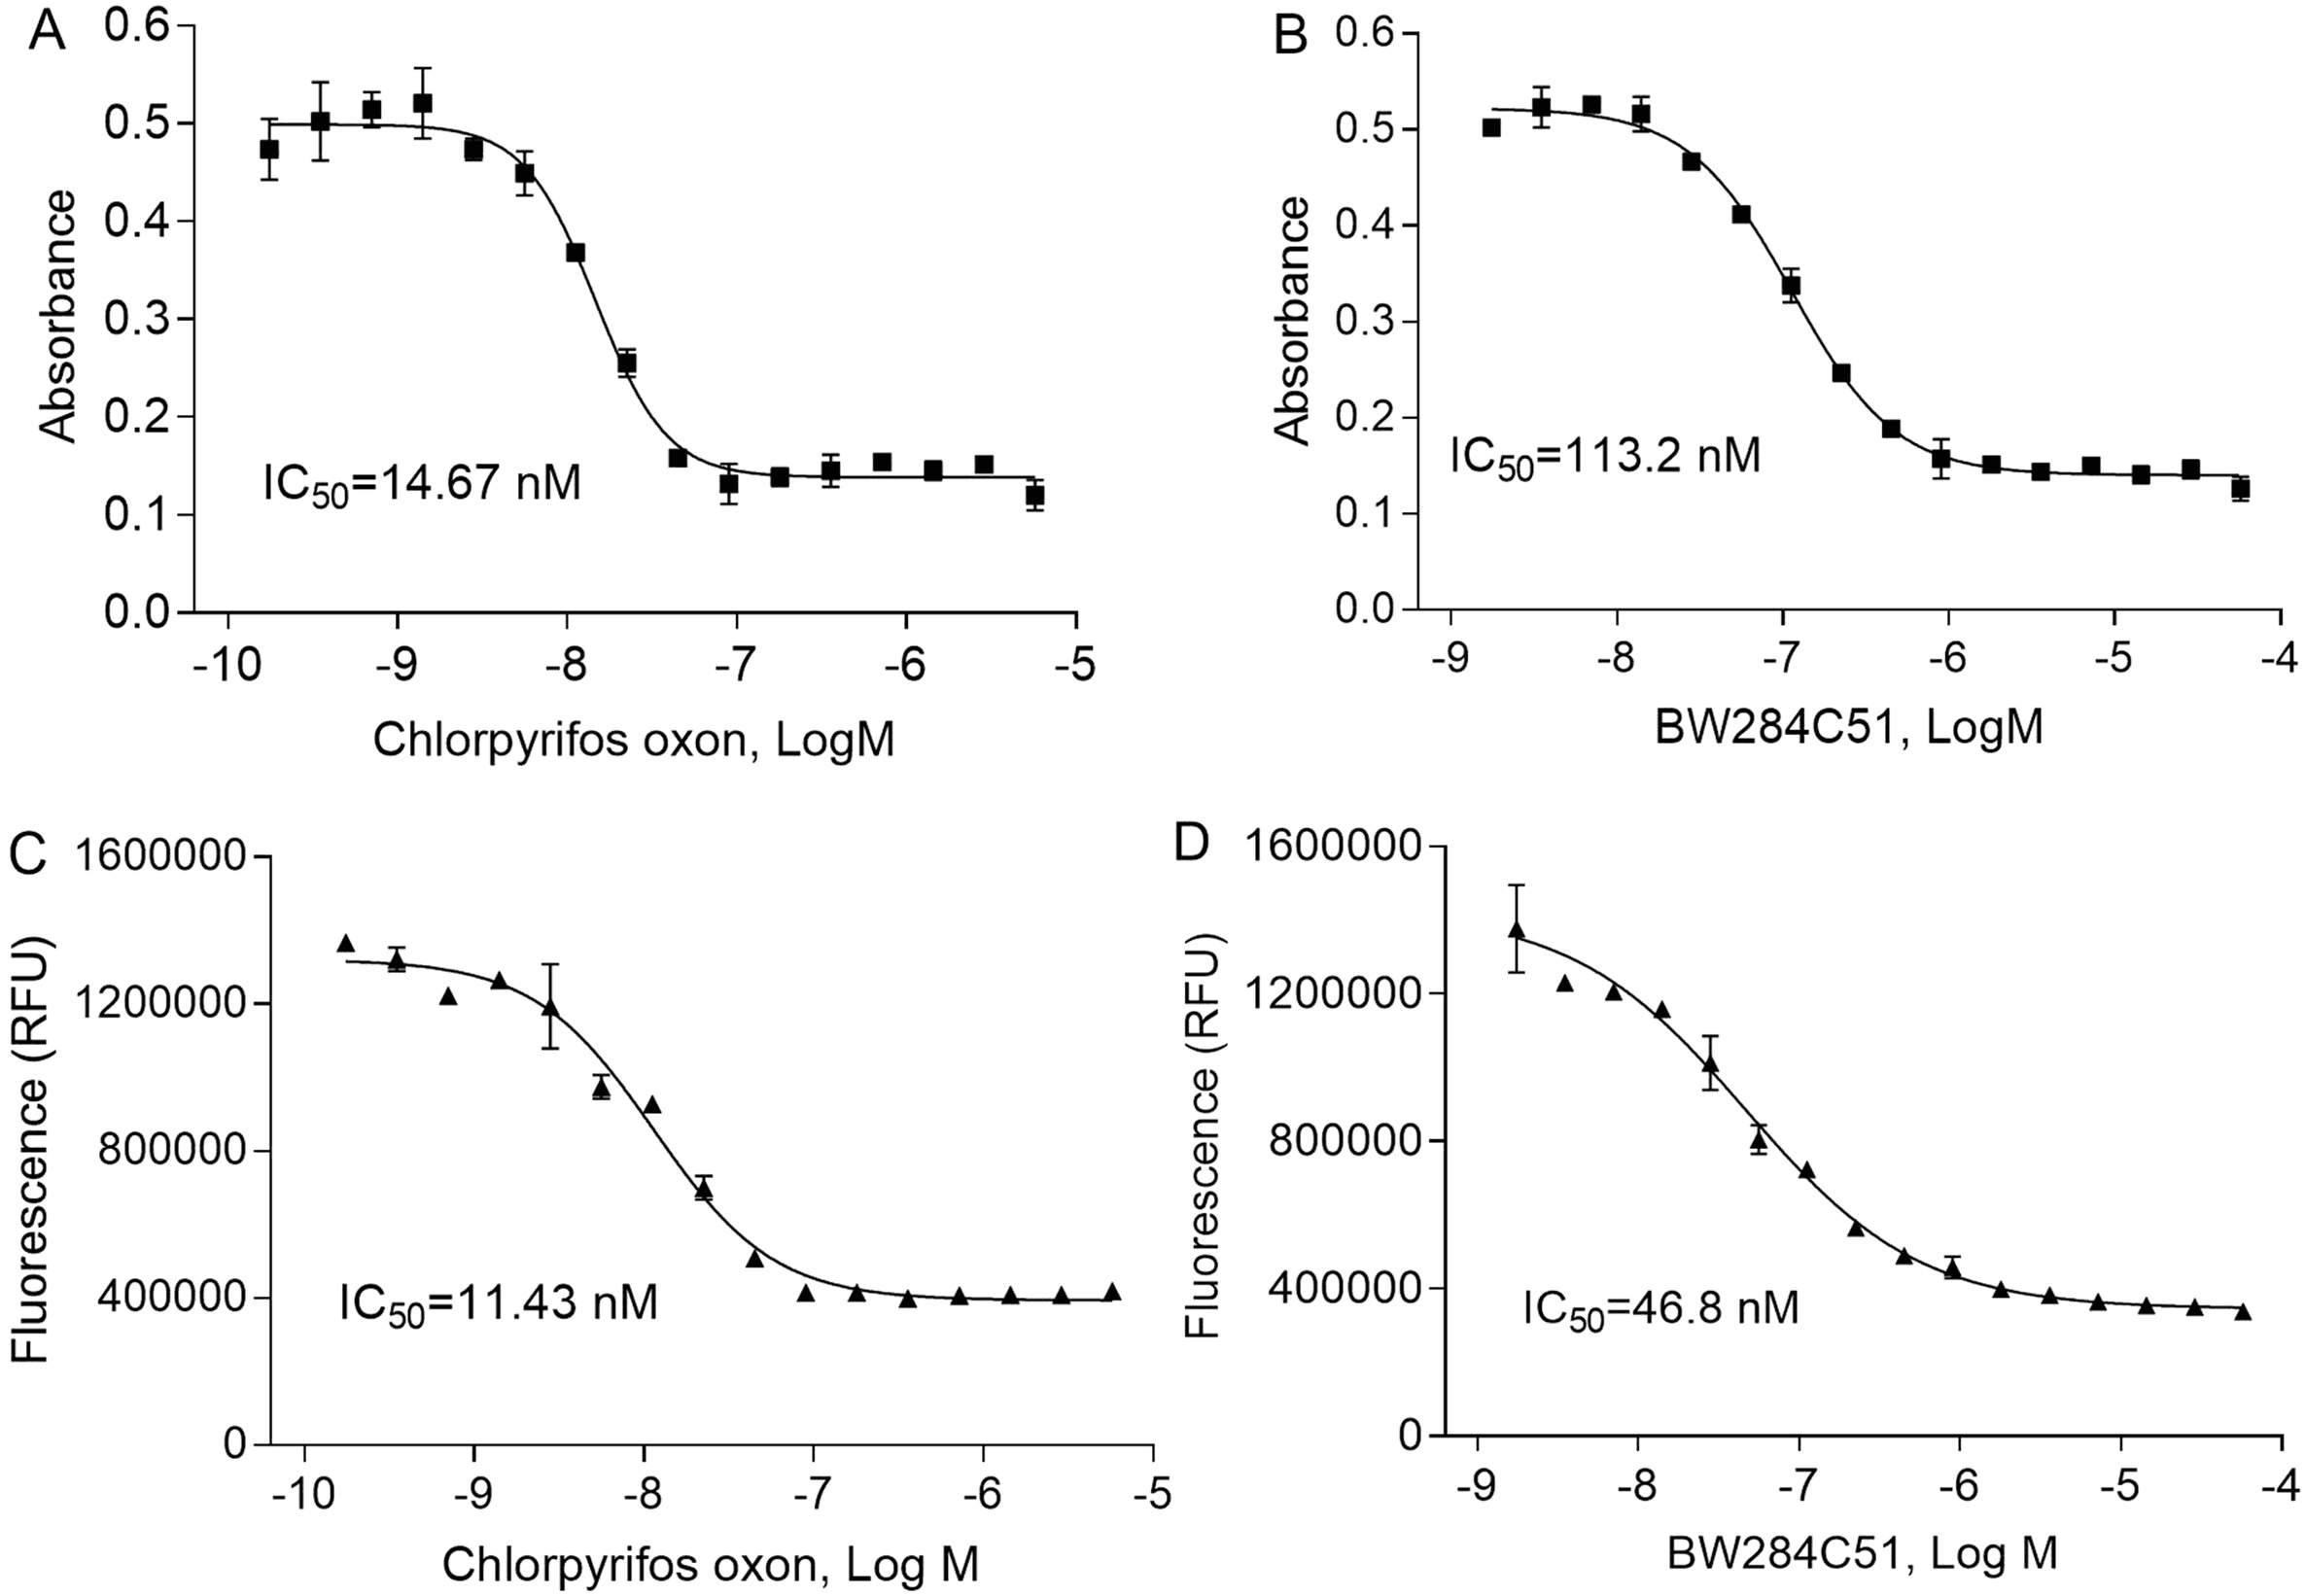 Concentration-response curves of human AChE assays. There were concentration-dependent inhibition curves in 1536-well plates treated with two positive controls, chlorpyrifos oxon and BW284C5. Two methods were used to measure AChE activity including colorimetric (A, B) and fluorescent methods (C, D). Each value represents the mean ± SD of three independent experiments. Amplite Colorimetric Acetylcholinesterase Assay kit (Ellman assay) and Amplite Fluorimetric Acetylcholinesterase Assay kit (Green Fluorescence) were purchased from AAT Bioquest, Inc. Source: <b>Use of high-throughput enzyme-based assay with xenobiotic metabolic capability to evaluate the inhibition of acetylcholinesterase activity by organophosphorous pesticides</b> by Li et.al., <em>Toxicology in Vitro</em>. April 2019.